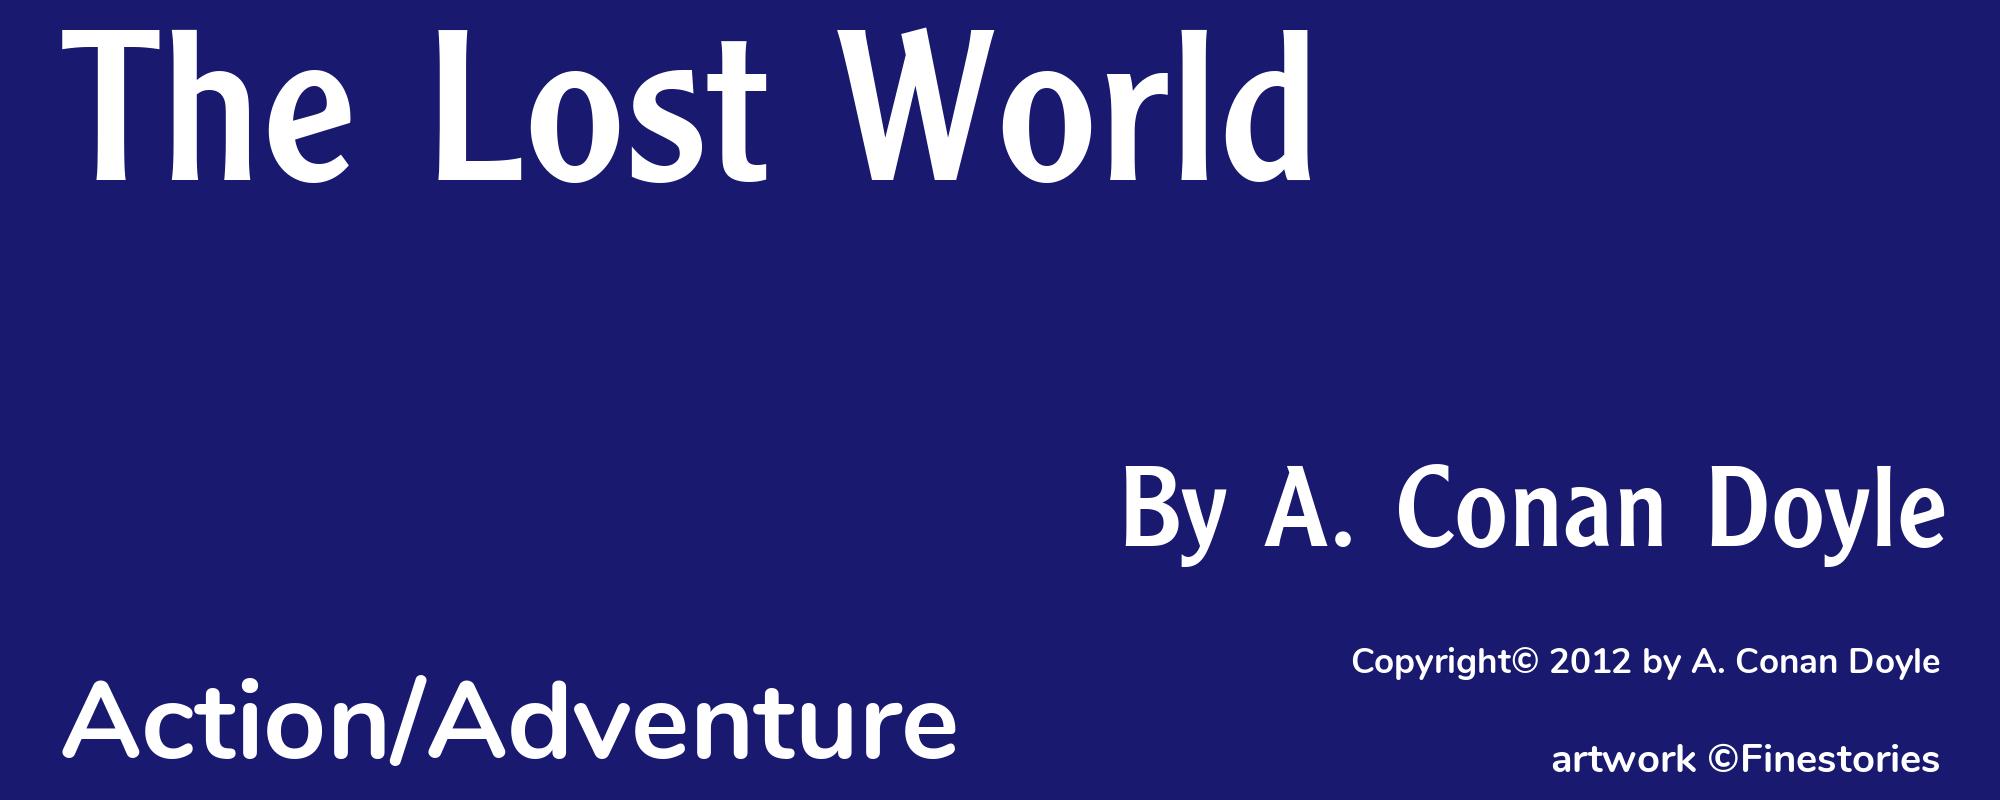 The Lost World - Cover